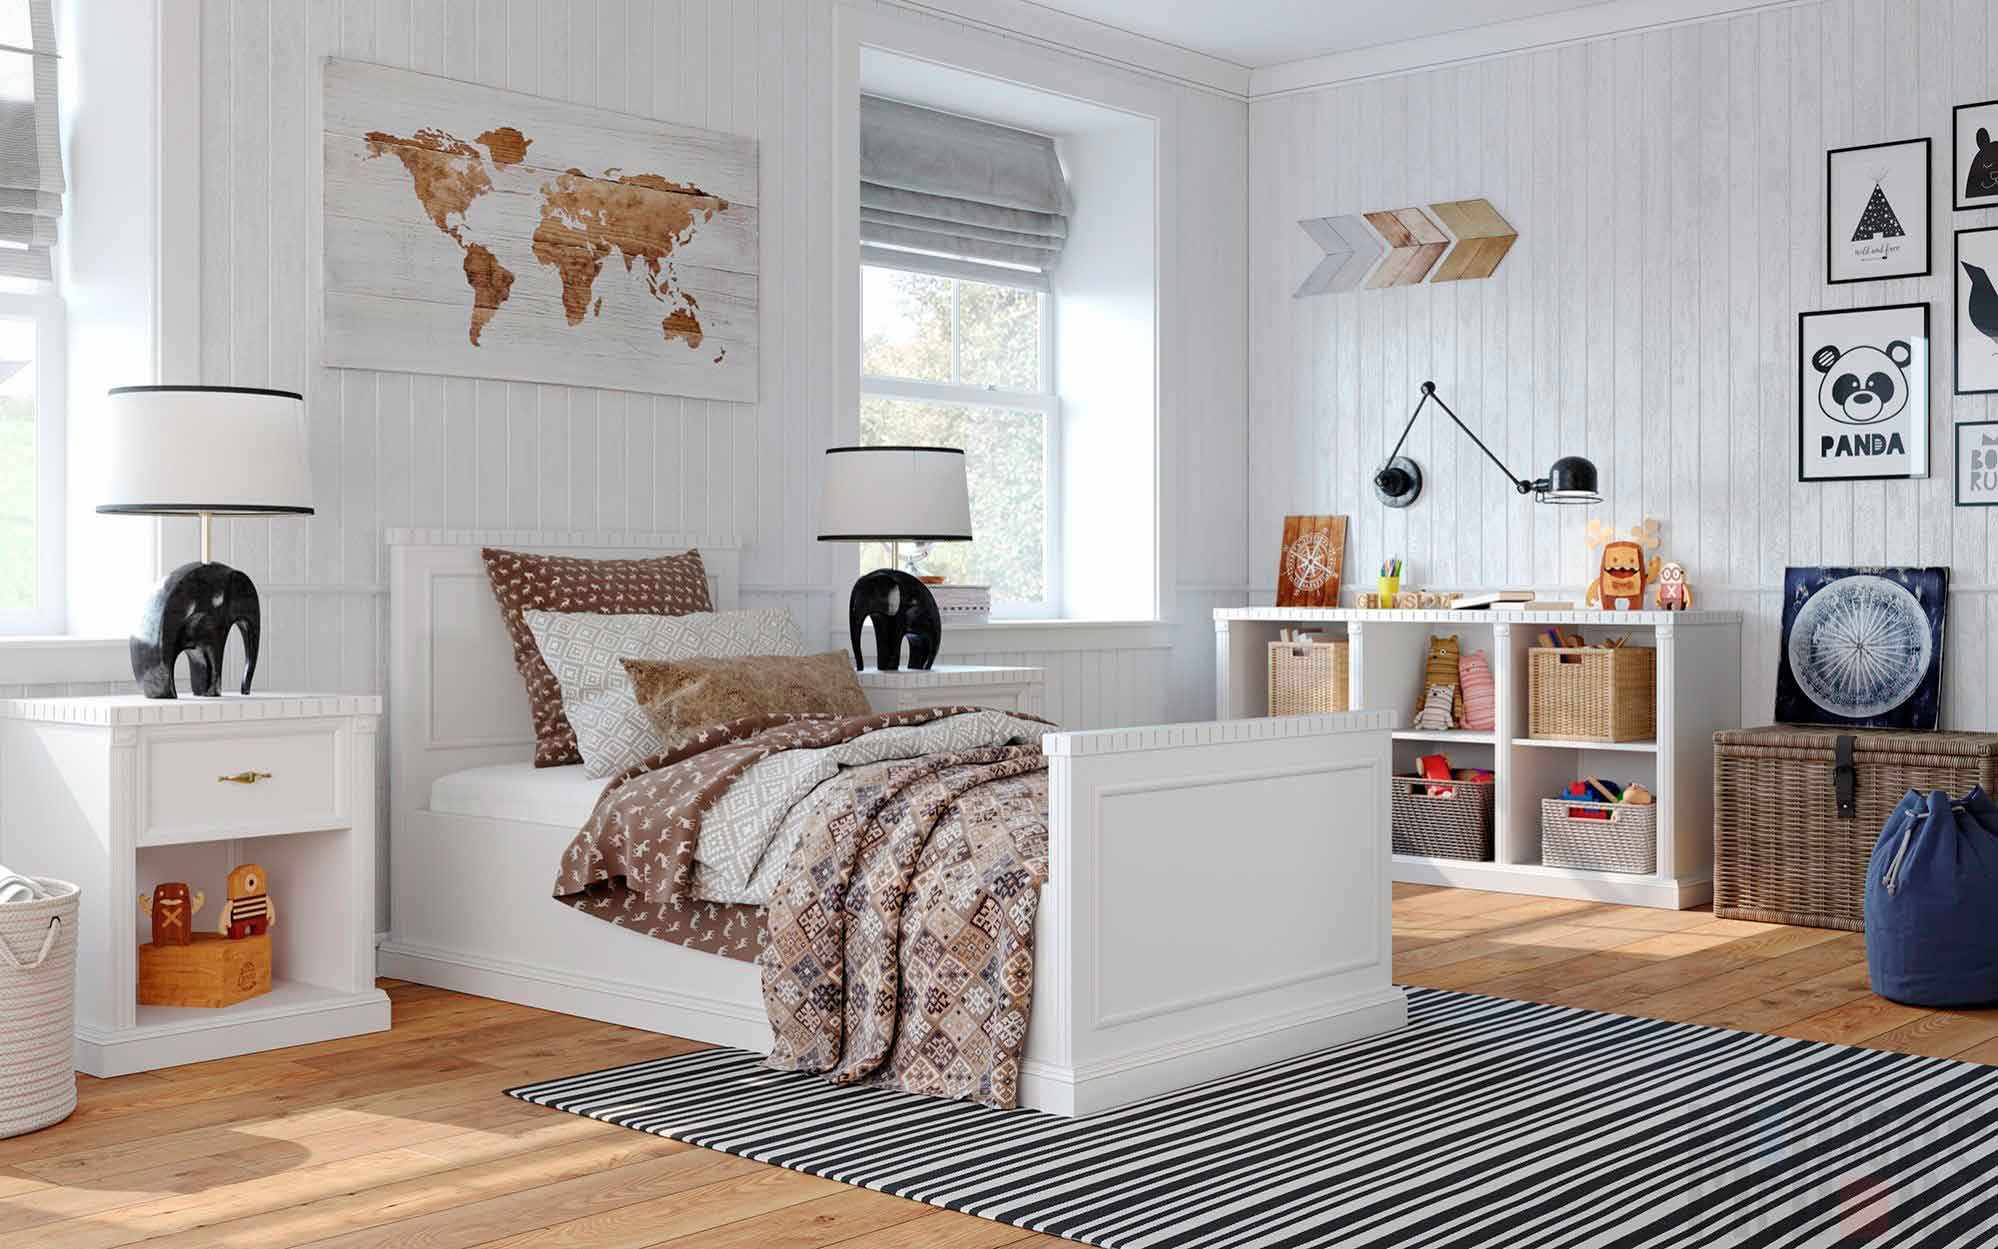 example of a beautiful interior of a children's room